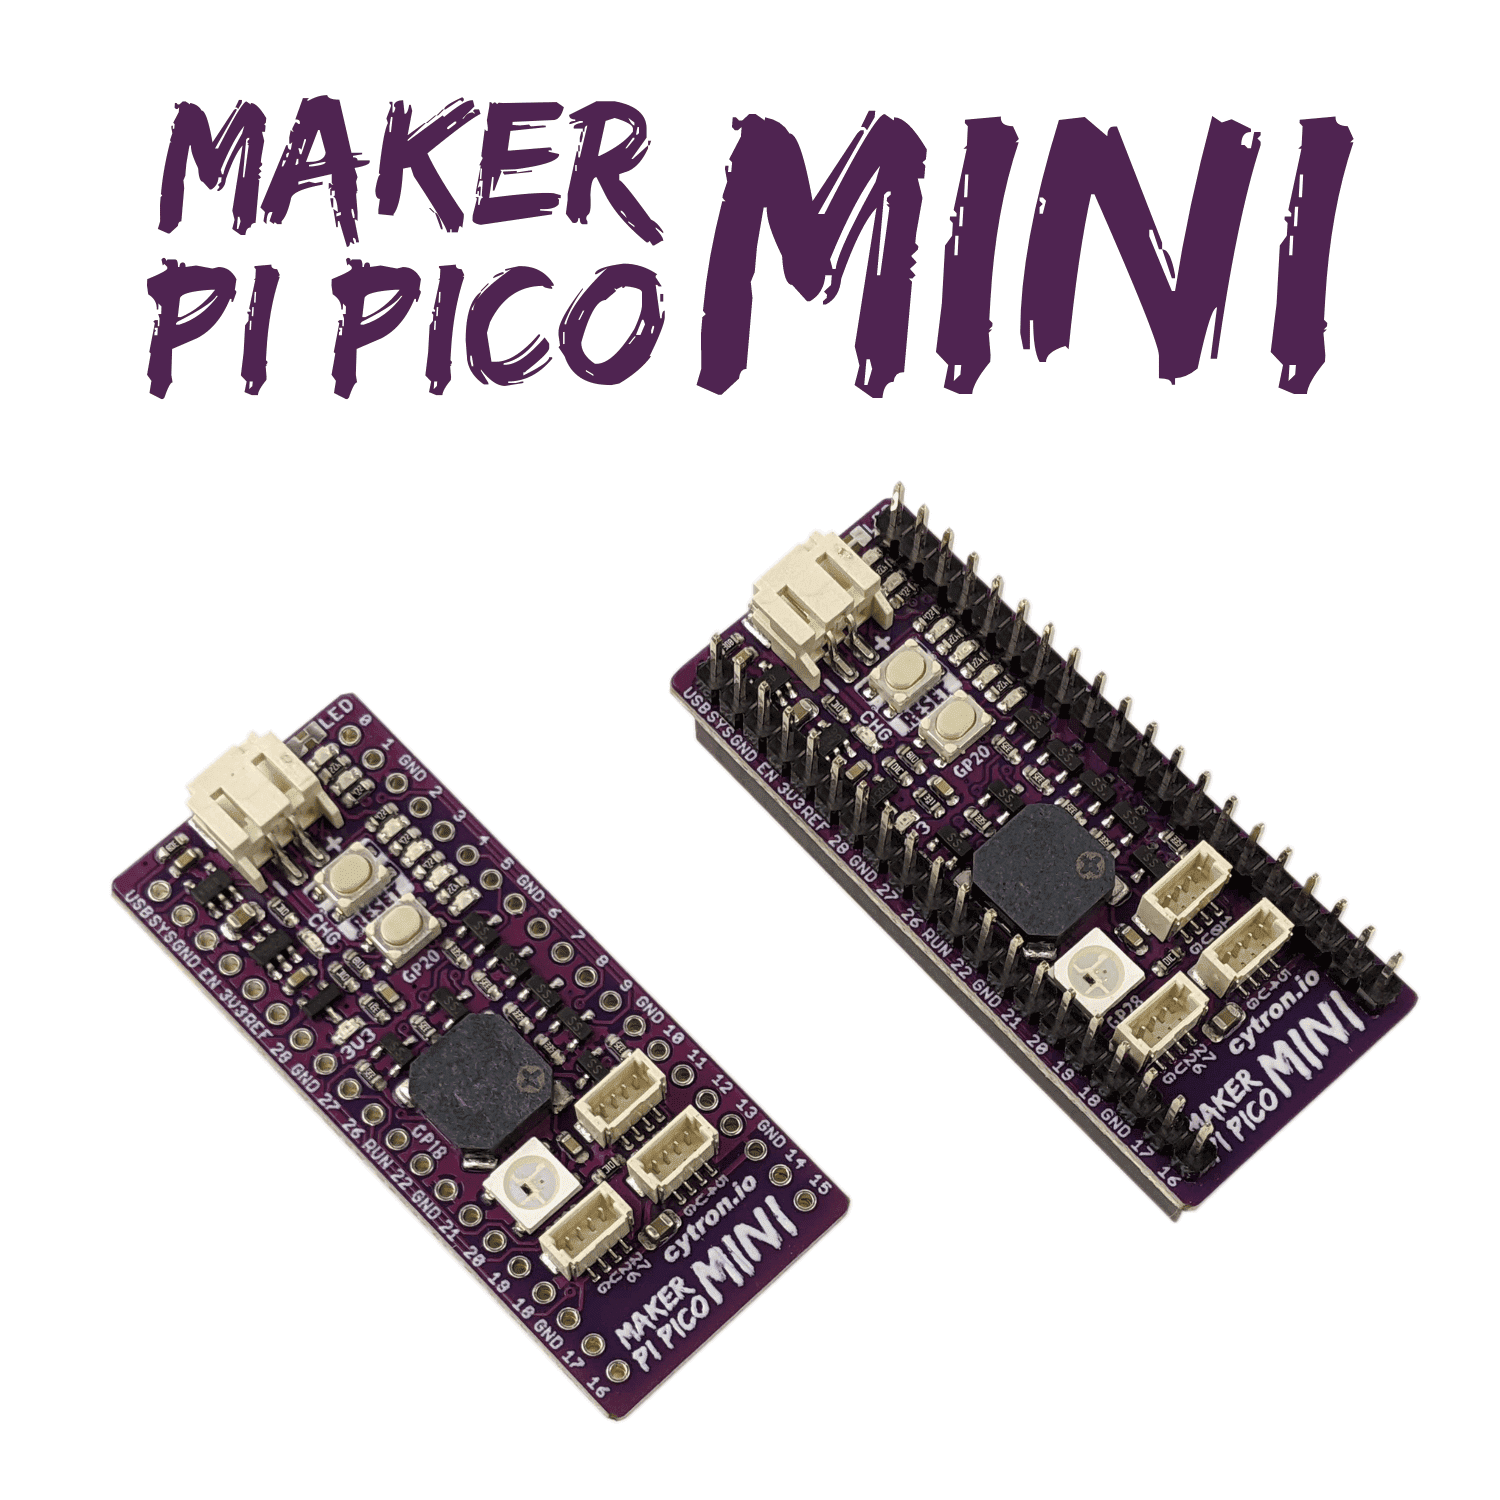 Maker Pi Pico Mini Simplifying Projects With Raspberry Pi Pico 2877